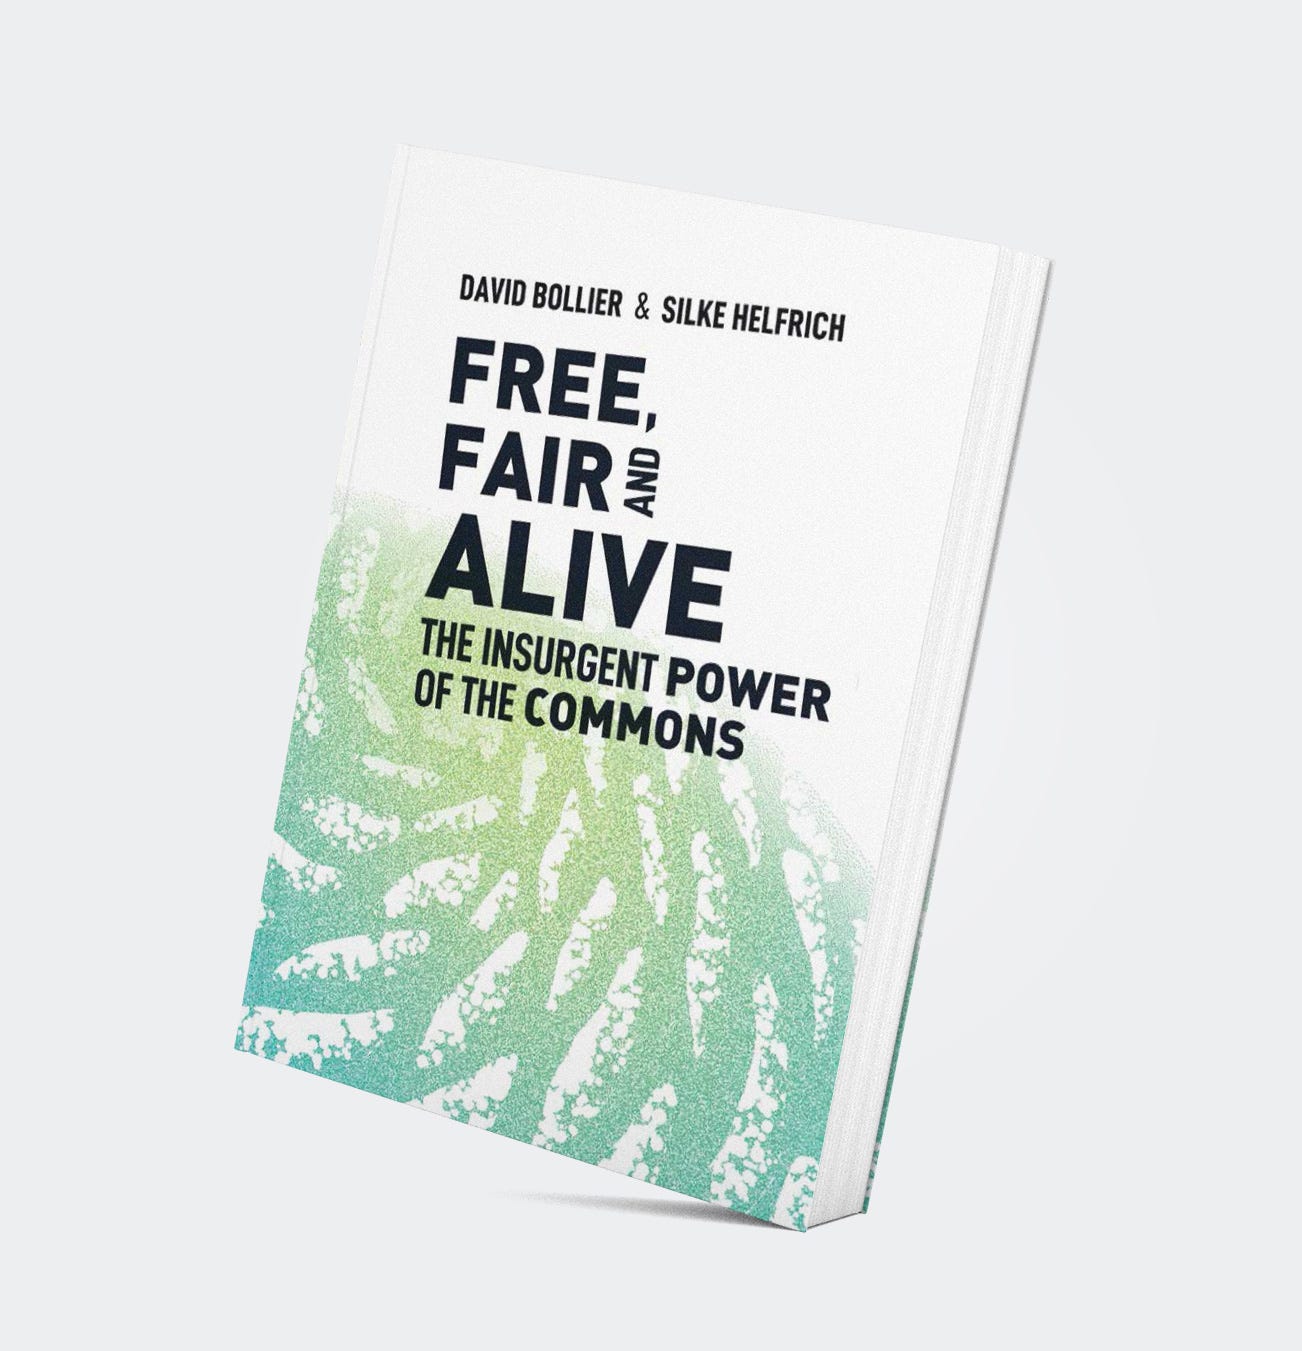 Cover of Free Fair and Alive by David Bollier and Silke Helfrich. Bold text with green network image